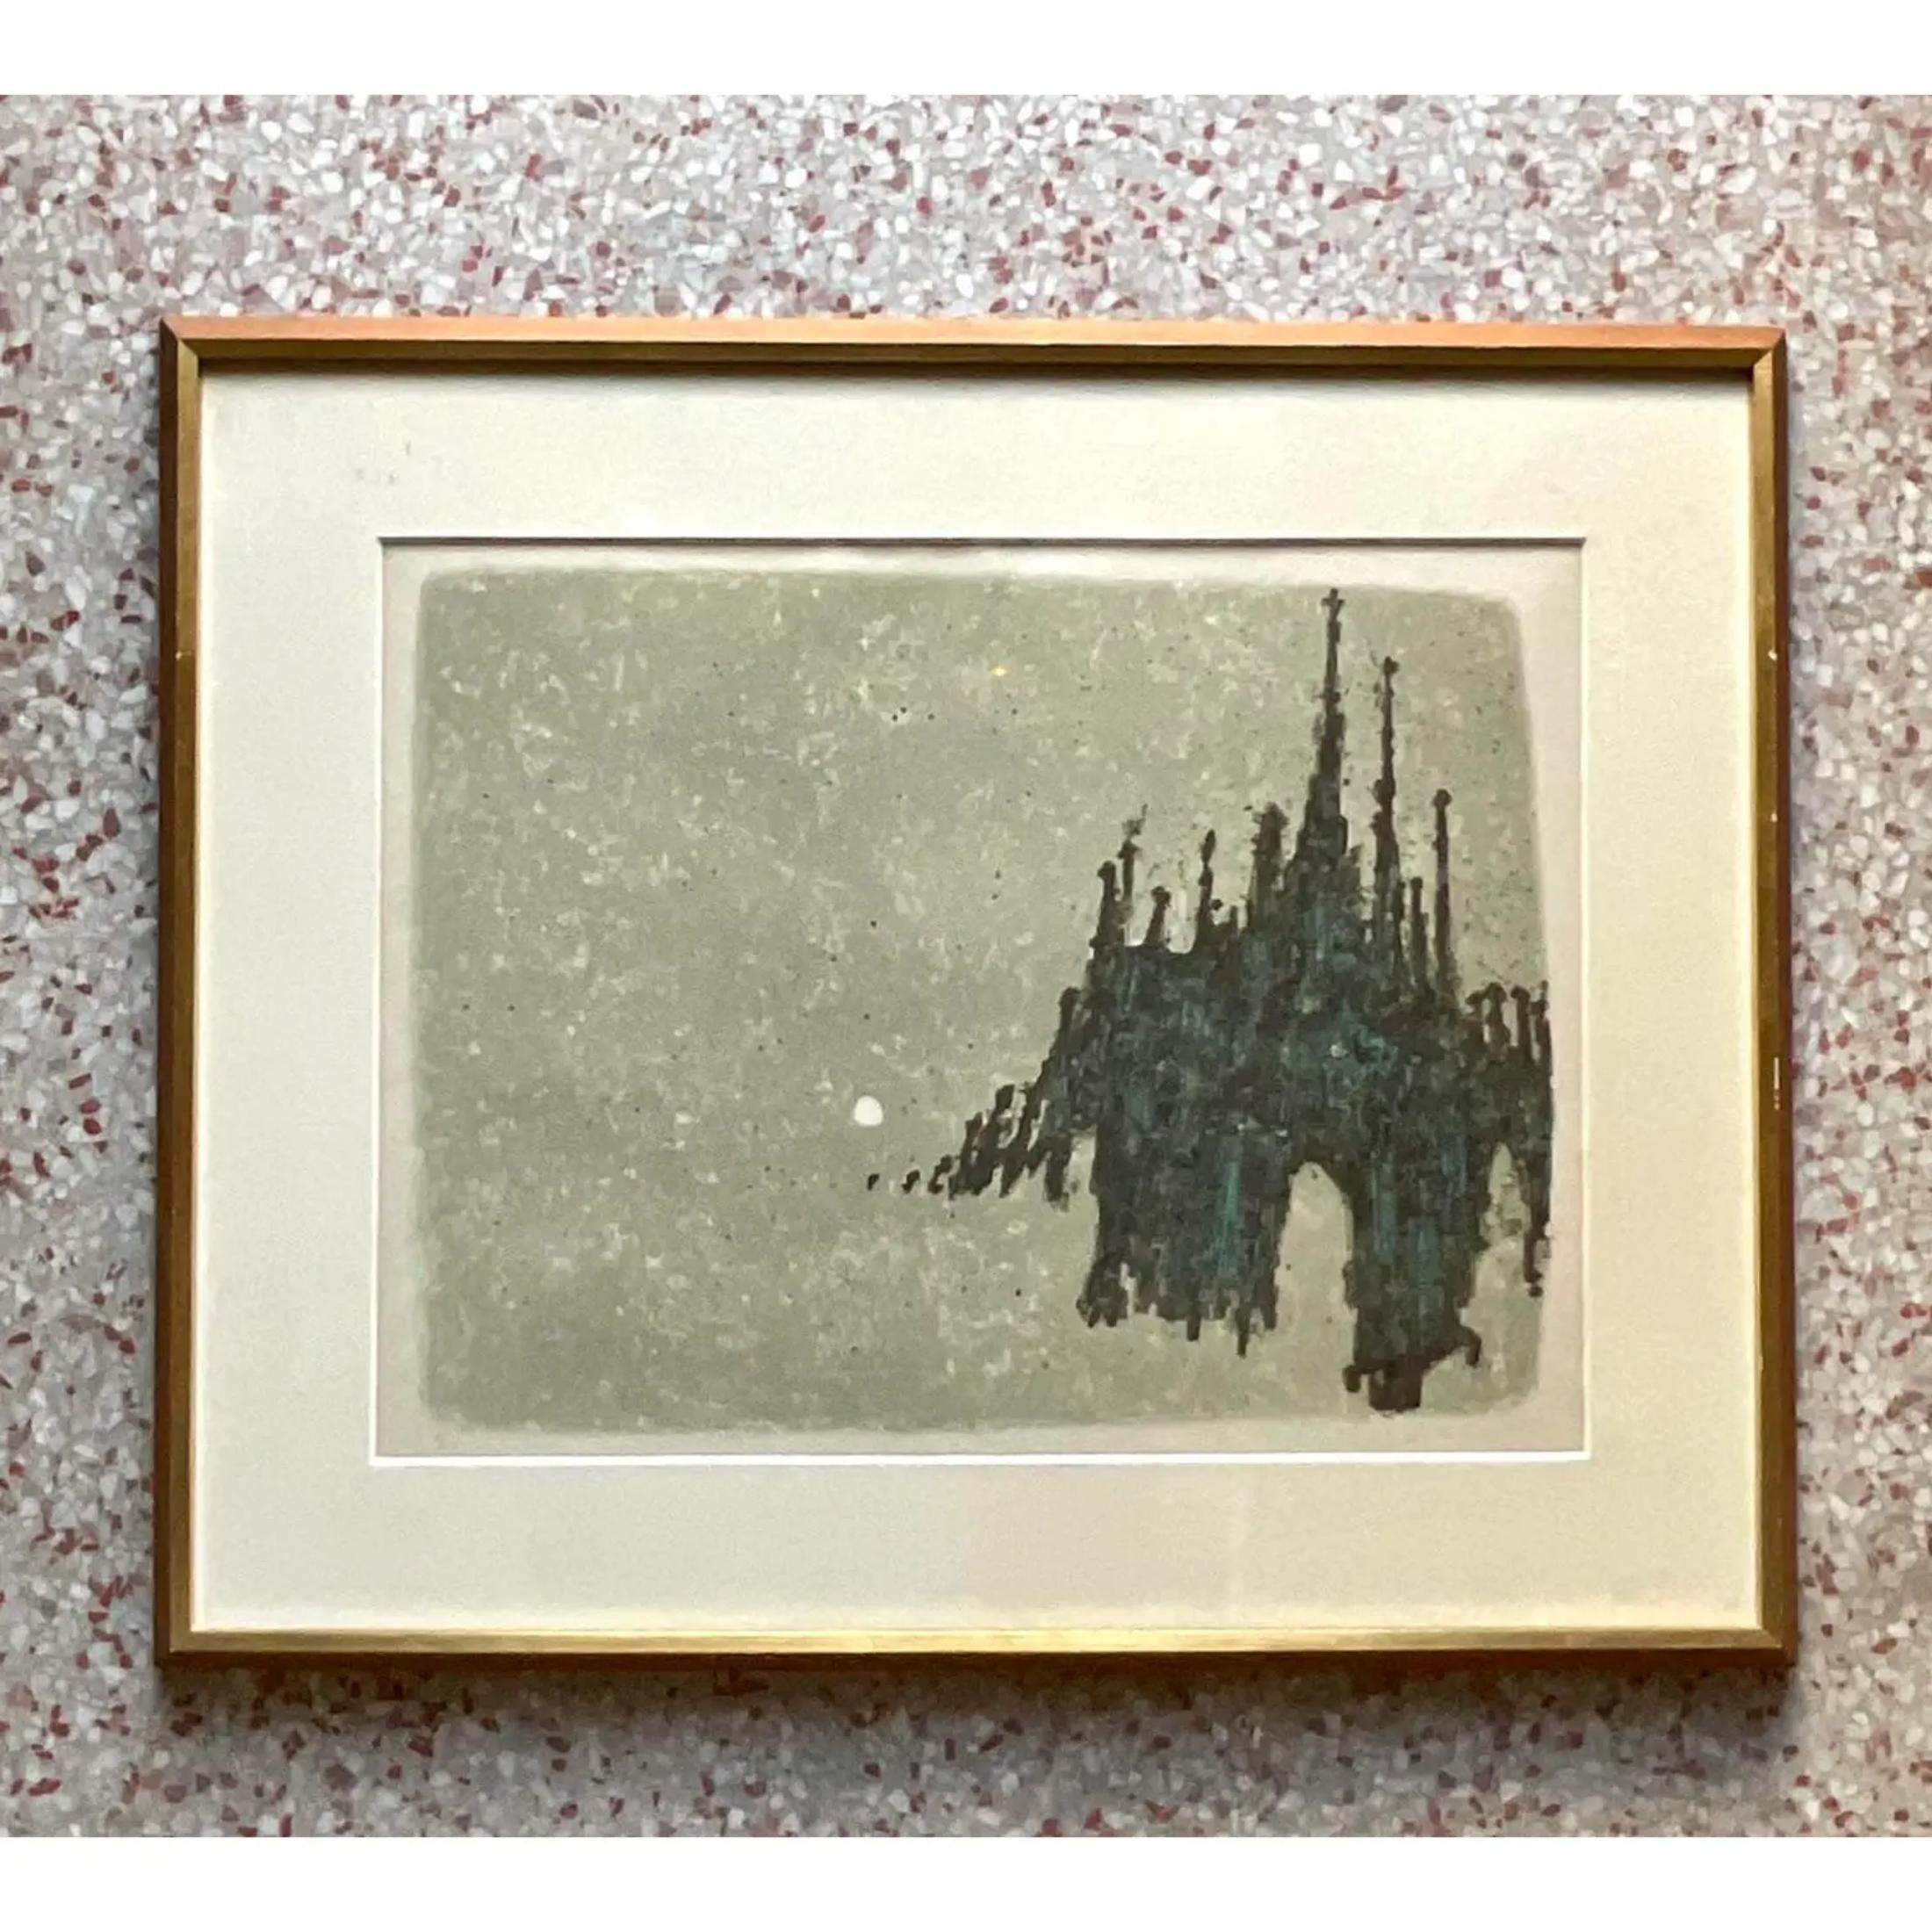 A fantastic vintage Boho original signed lithograph. A chic Abstract skyline with flashes of light. Signed by the artist. Acquired from a Palm Beach estate